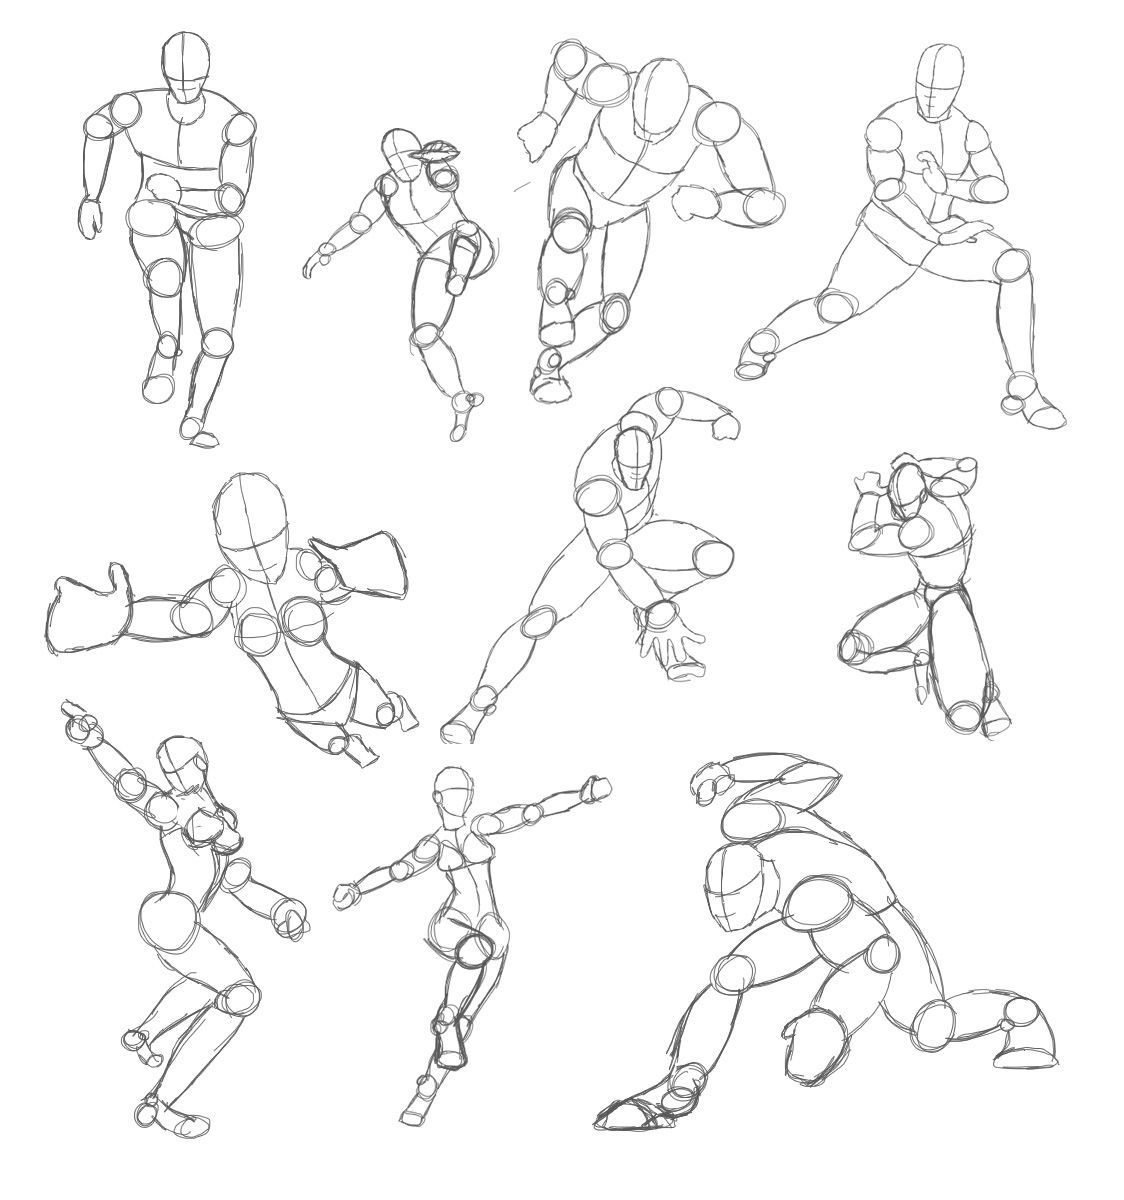 Action Pose Collection #1 by Capella336 on deviantART | Figure drawing  reference, Drawing reference poses, Art reference poses